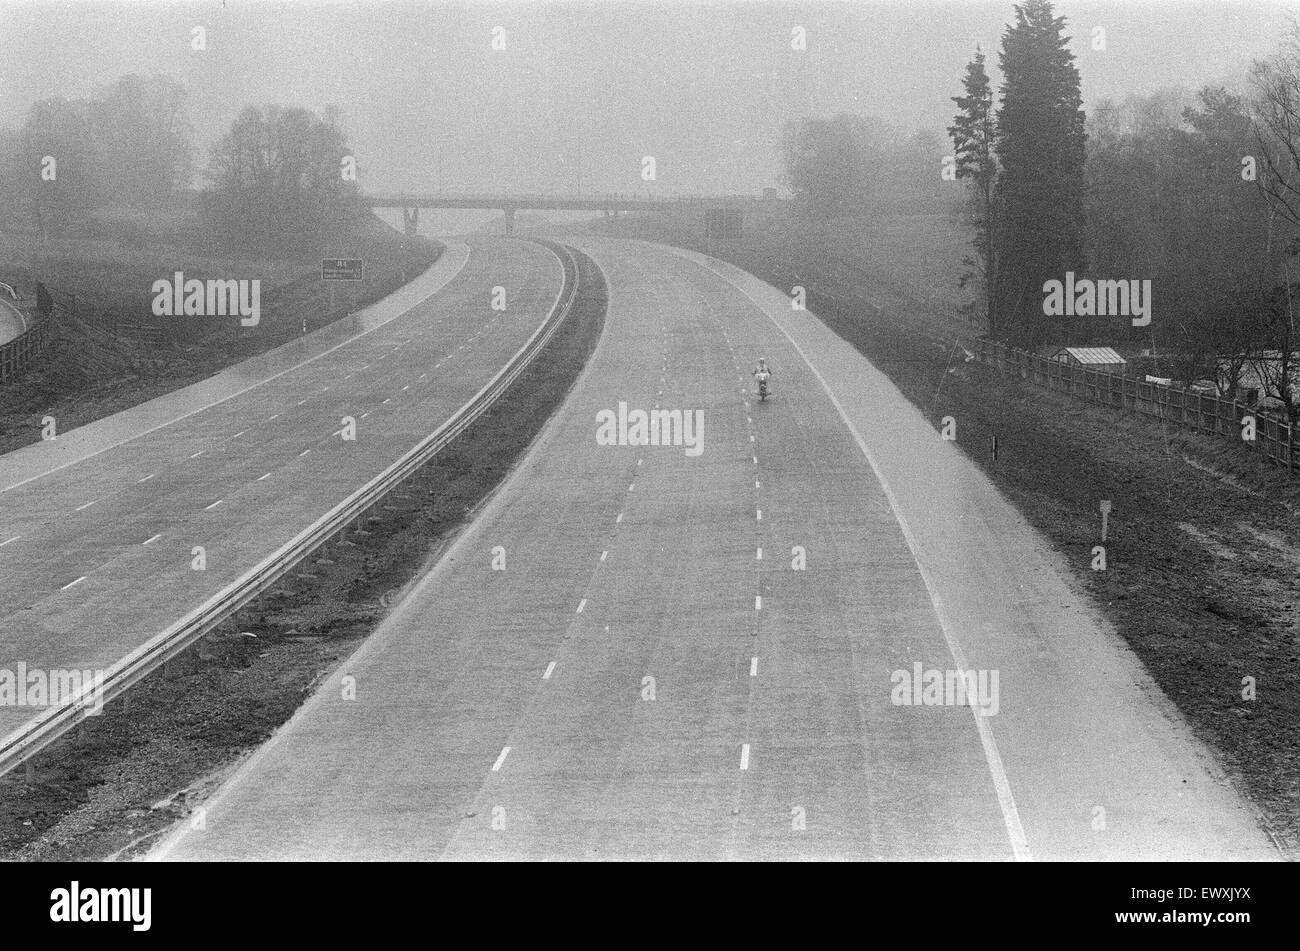 Opening of M4 Motorway 22nd December 1971. With the English section of the motorway completed. A 50 mile (80 km) stretch between Junctions 9 and 15  (Maidenhead and Swindon) and opened to traffic. Stock Photo